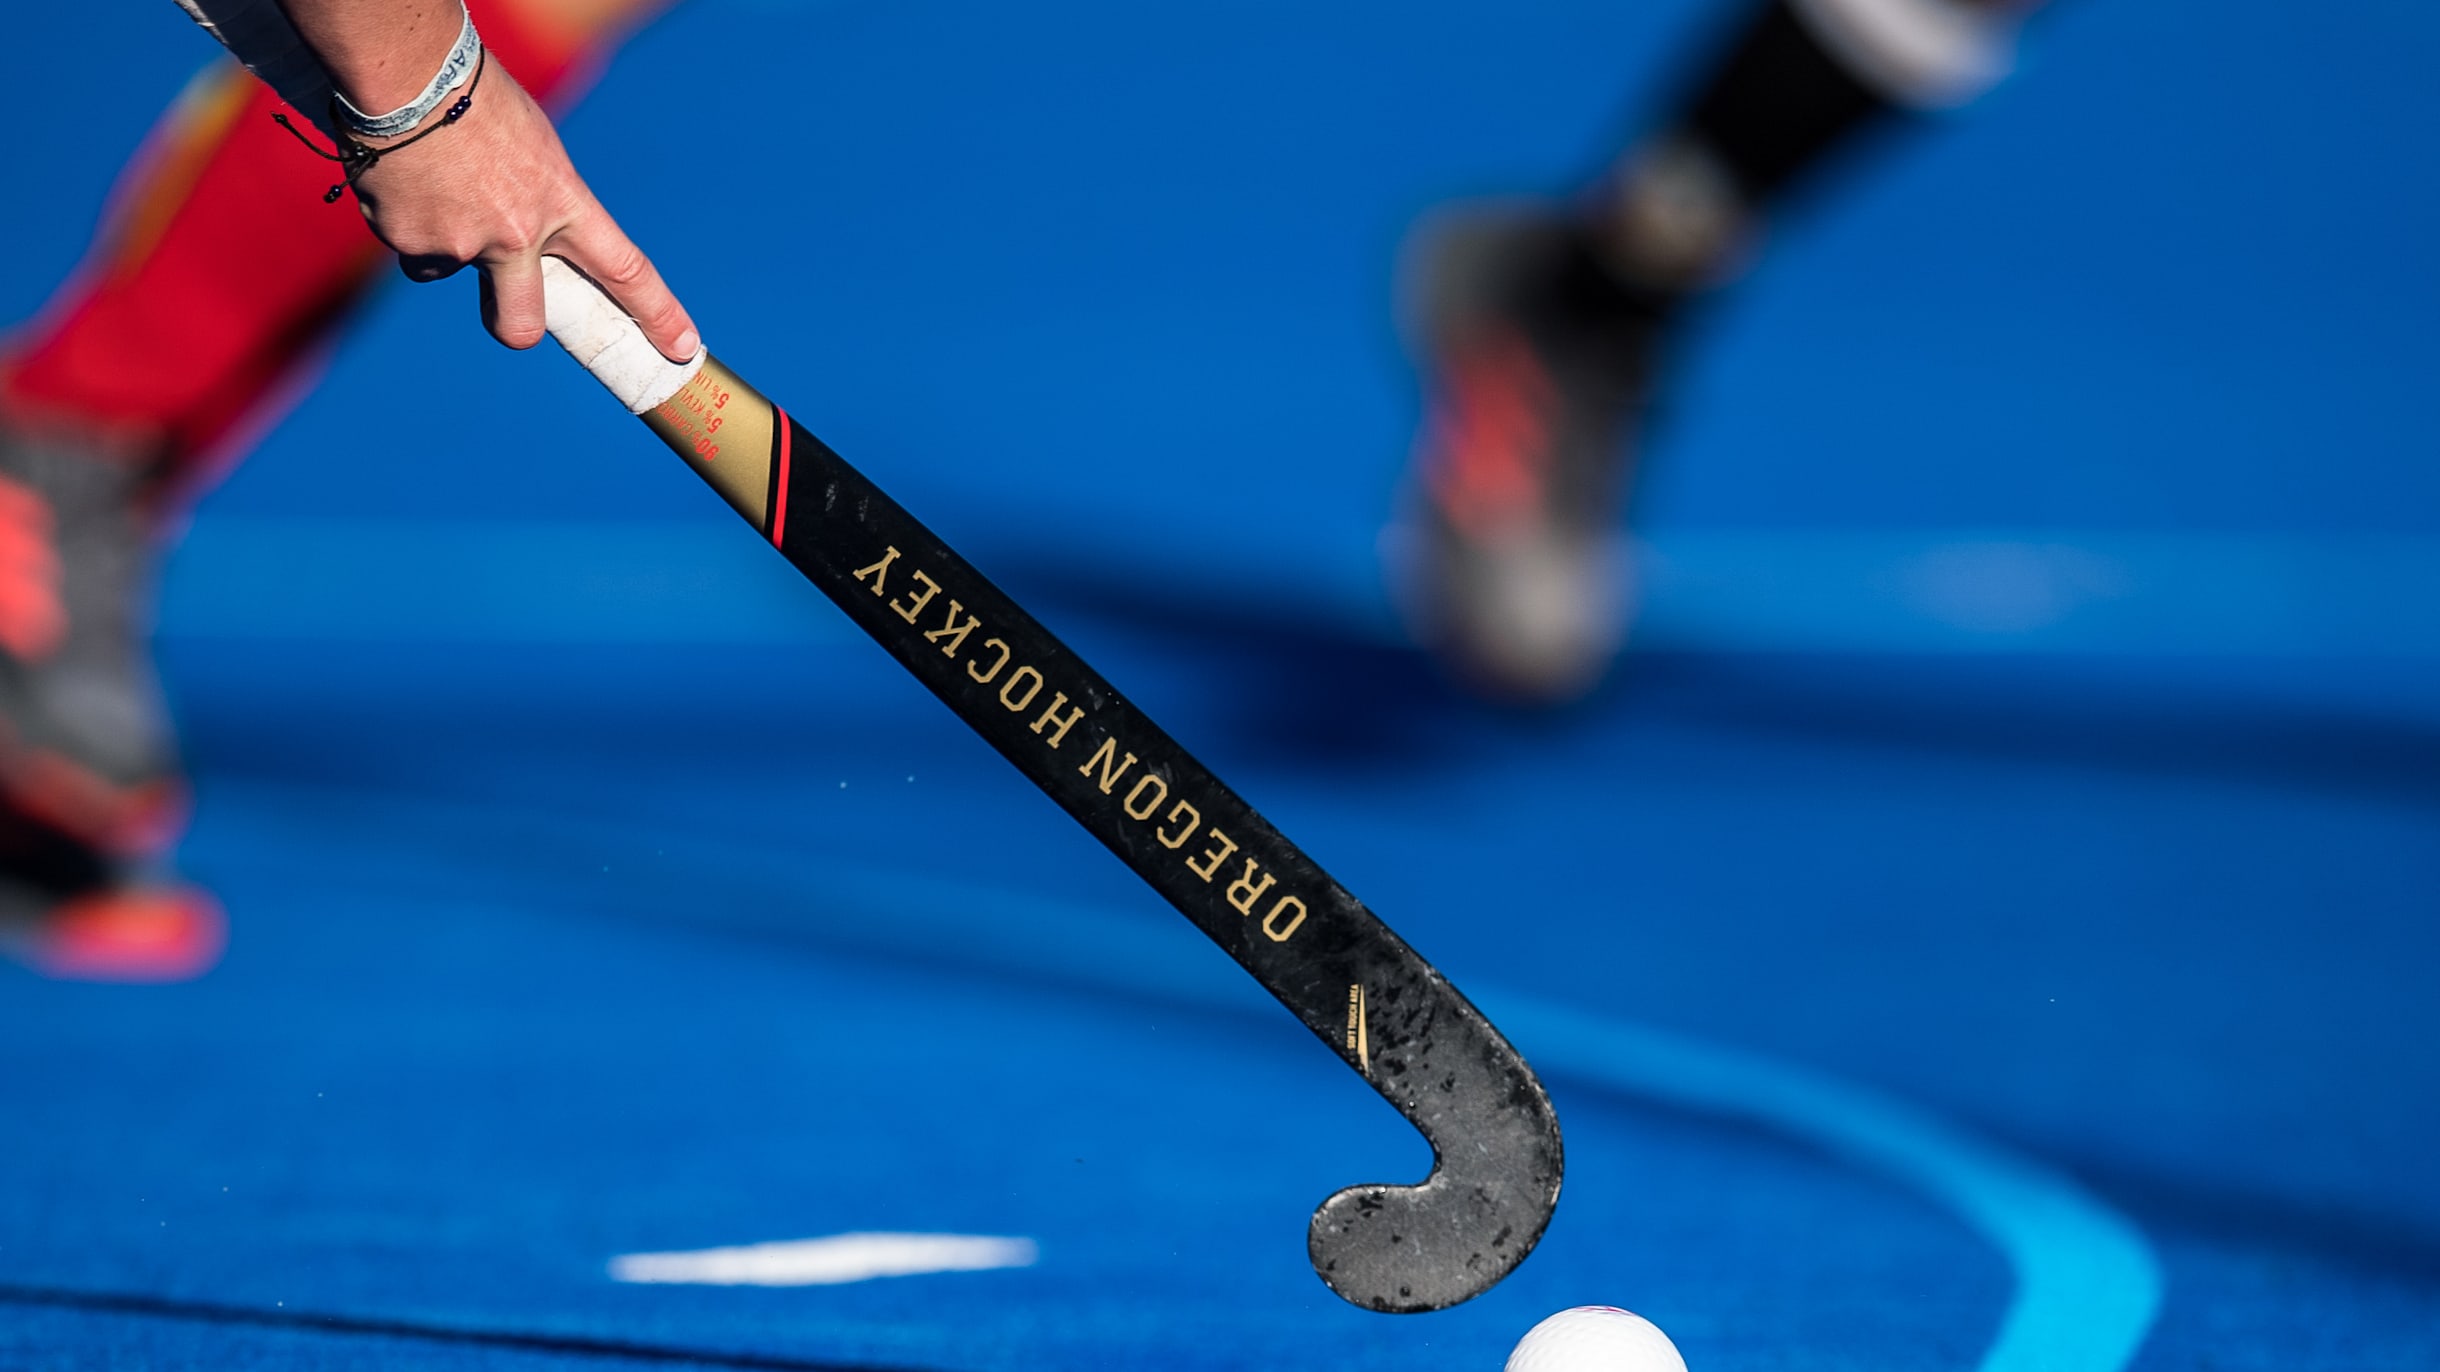 doolhof raket Reageer Hockey stick: Know the size, weight and materials used